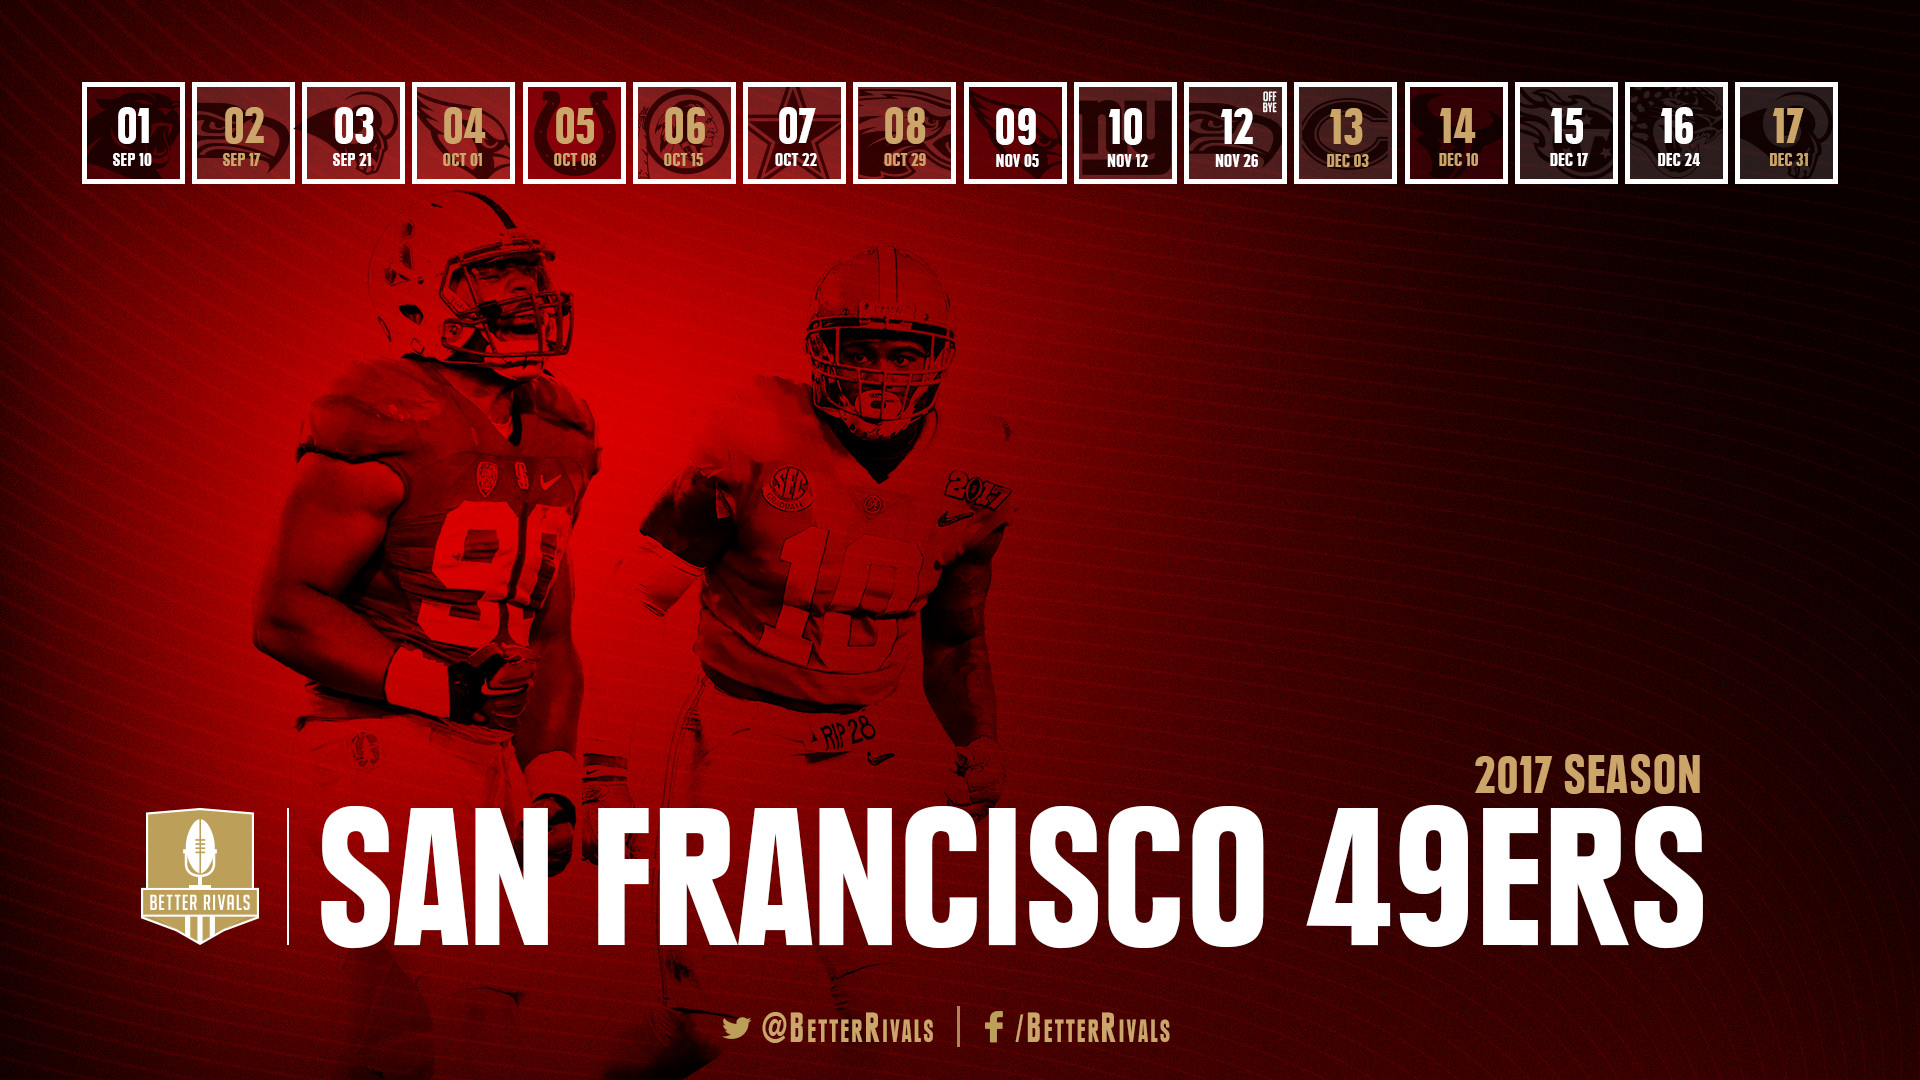 1920x1080 49ers schedule wallpapers for iPhone, Android, desktop